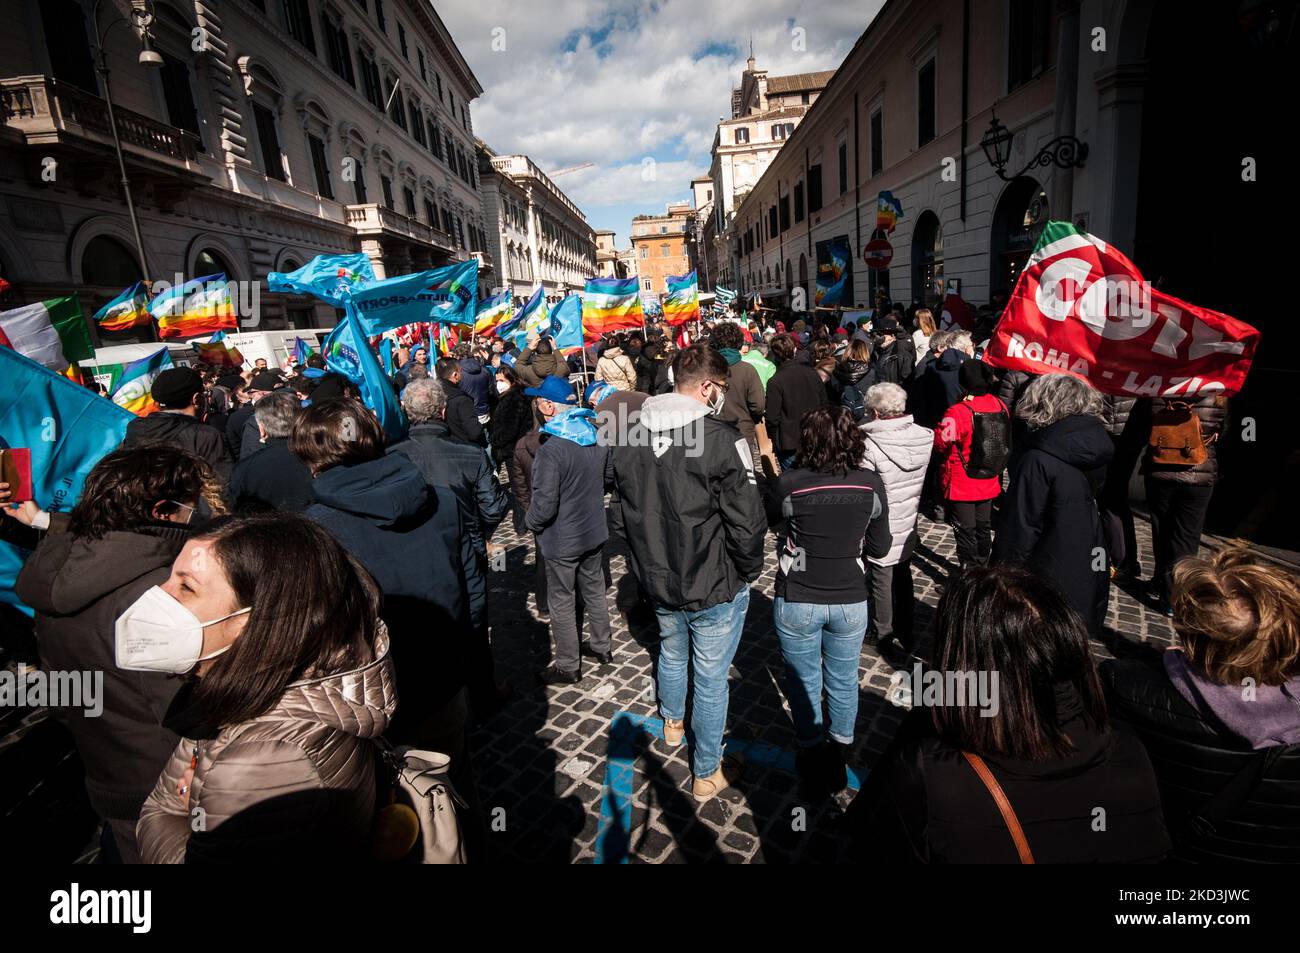 People take part in a rally organised by the Italian Network for Peace and Disarmament, which also includes the trade unions Cgil,Cisl,Uil to call for ''world peace'', in Rome, Italy, 26 February 2022. Ukrainian and Italian citizens gathered to show their support for Ukraine and to protest against Russia's invasion. (Photo by Andrea Ronchini/NurPhoto) Stock Photo